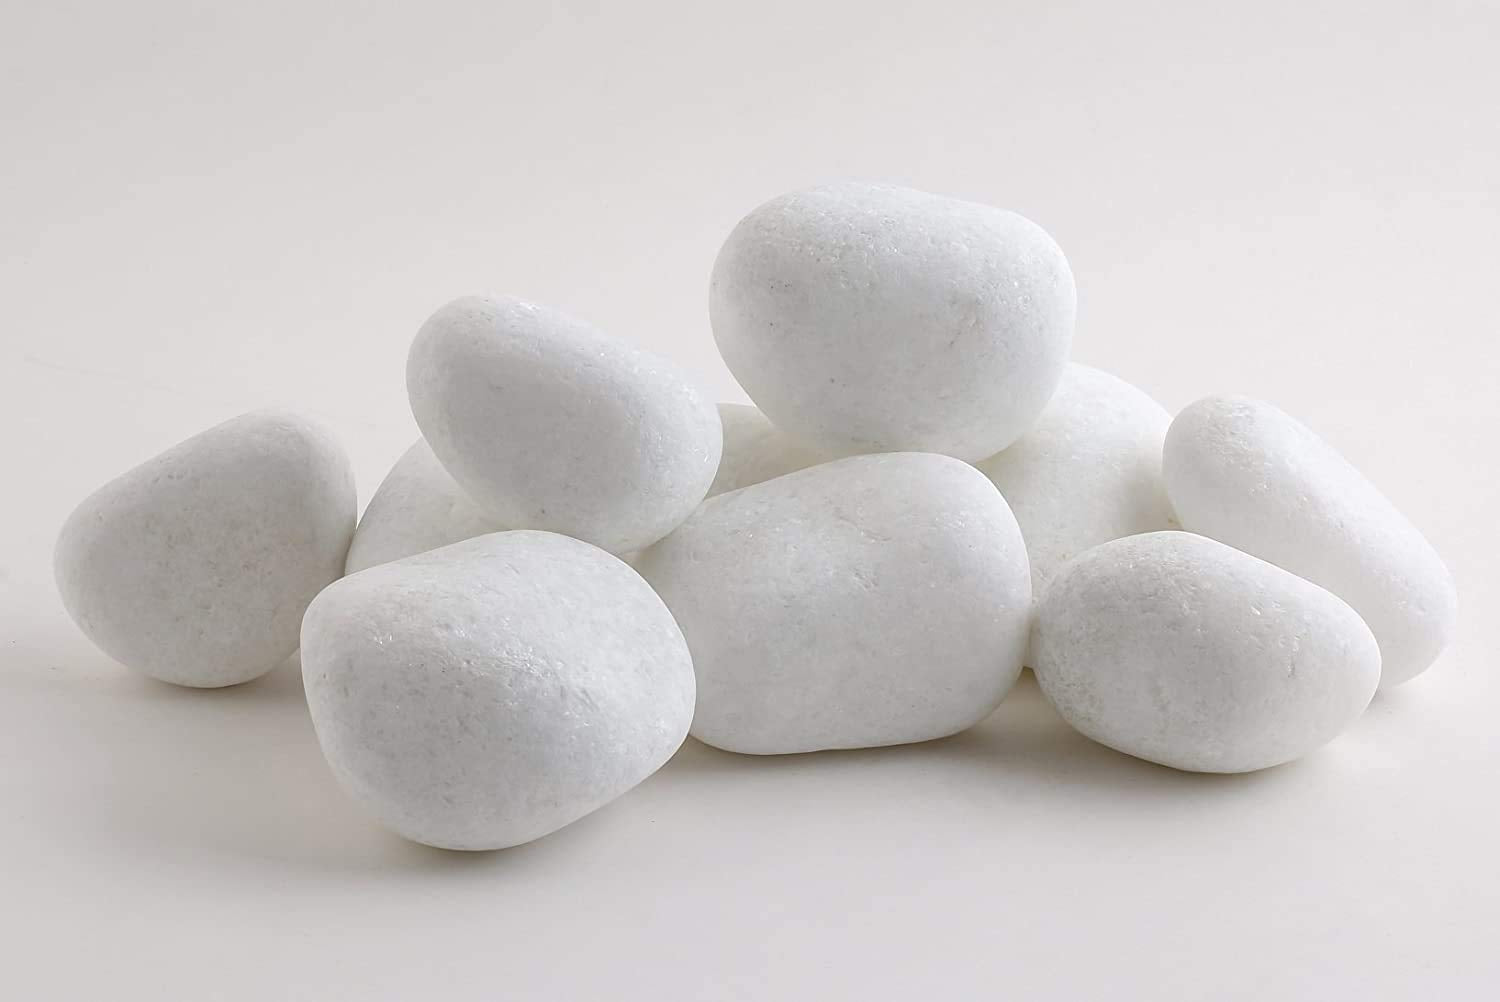 Unpolished White Decorative, Landscaping And Garden Stone Pebbles For Flower Vase & Multi Purpose Pack